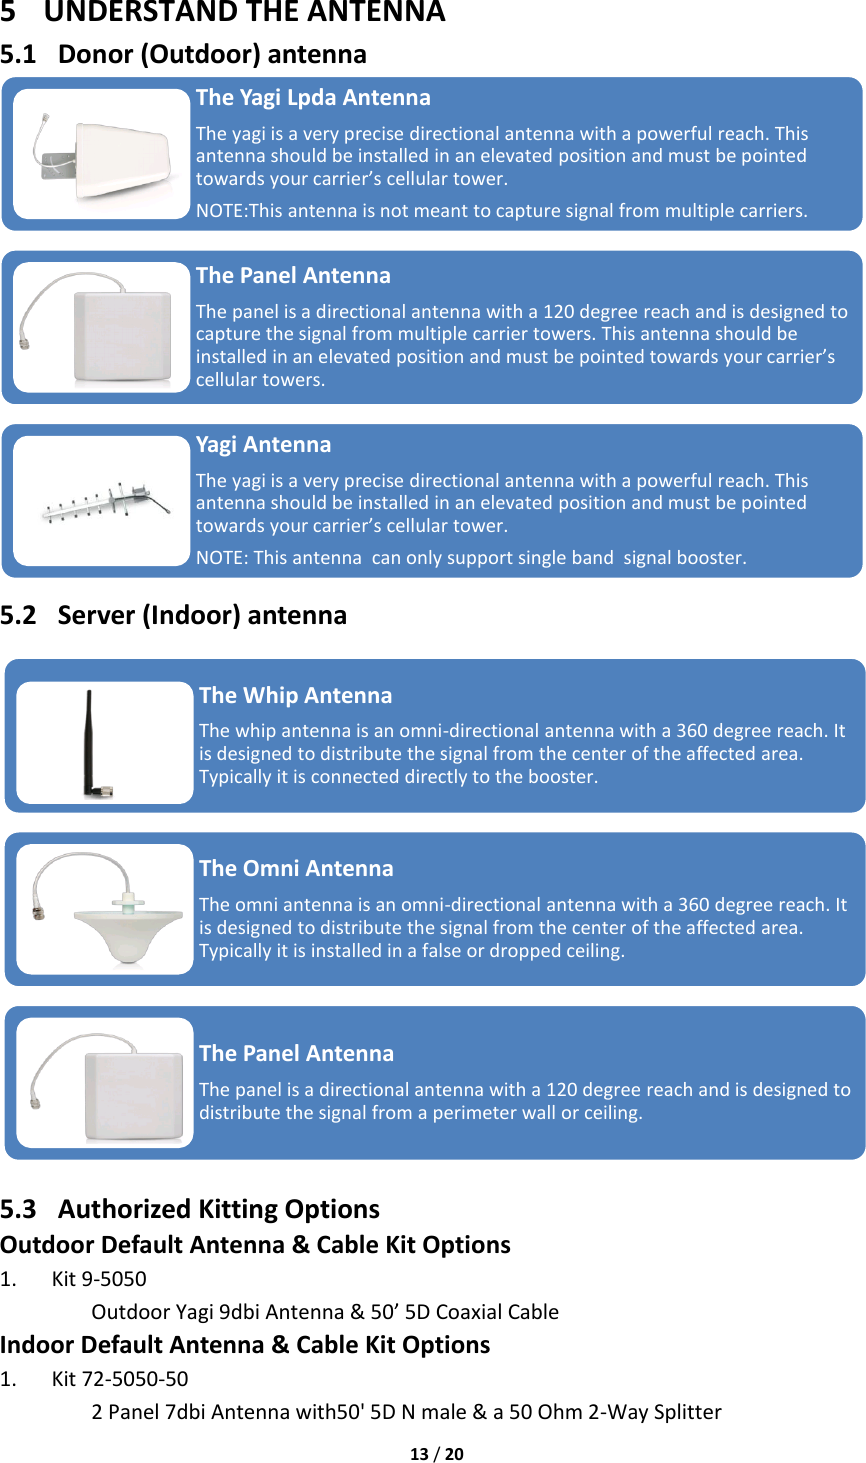   13 / 20  5 UNDERSTAND THE ANTENNA 5.1   Donor (Outdoor) antenna  5.2   Server (Indoor) antenna            5.3   Authorized Kitting Options     Outdoor Default Antenna &amp; Cable Kit Options         1.      Kit 9-5050    Outdoor Yagi 9dbi Antenna &amp; 50’ 5D Coaxial Cable     Indoor Default Antenna &amp; Cable Kit Options   1.      Kit 72-5050-50   2 Panel 7dbi Antenna with50&apos; 5D N male &amp; a 50 Ohm 2-Way Splitter     The Yagi Lpda Antenna The yagi is a very precise directional antenna with a powerful reach. This antenna should be installed in an elevated position and must be pointed towards your carrier’s cellular tower.  NOTE:This antenna is not meant to capture signal from multiple carriers. The Panel Antenna The panel is a directional antenna with a 120 degree reach and is designed to capture the signal from multiple carrier towers. This antenna should be installed in an elevated position and must be pointed towards your carrier’s cellular towers. Yagi Antenna The yagi is a very precise directional antenna with a powerful reach. This antenna should be installed in an elevated position and must be pointed towards your carrier’s cellular tower.  NOTE: This antenna  can only support single band  signal booster. The Whip Antenna The whip antenna is an omni-directional antenna with a 360 degree reach. It is designed to distribute the signal from the center of the affected area. Typically it is connected directly to the booster. The Omni Antenna The omni antenna is an omni-directional antenna with a 360 degree reach. It is designed to distribute the signal from the center of the affected area. Typically it is installed in a false or dropped ceiling. The Panel Antenna The panel is a directional antenna with a 120 degree reach and is designed to distribute the signal from a perimeter wall or ceiling.  